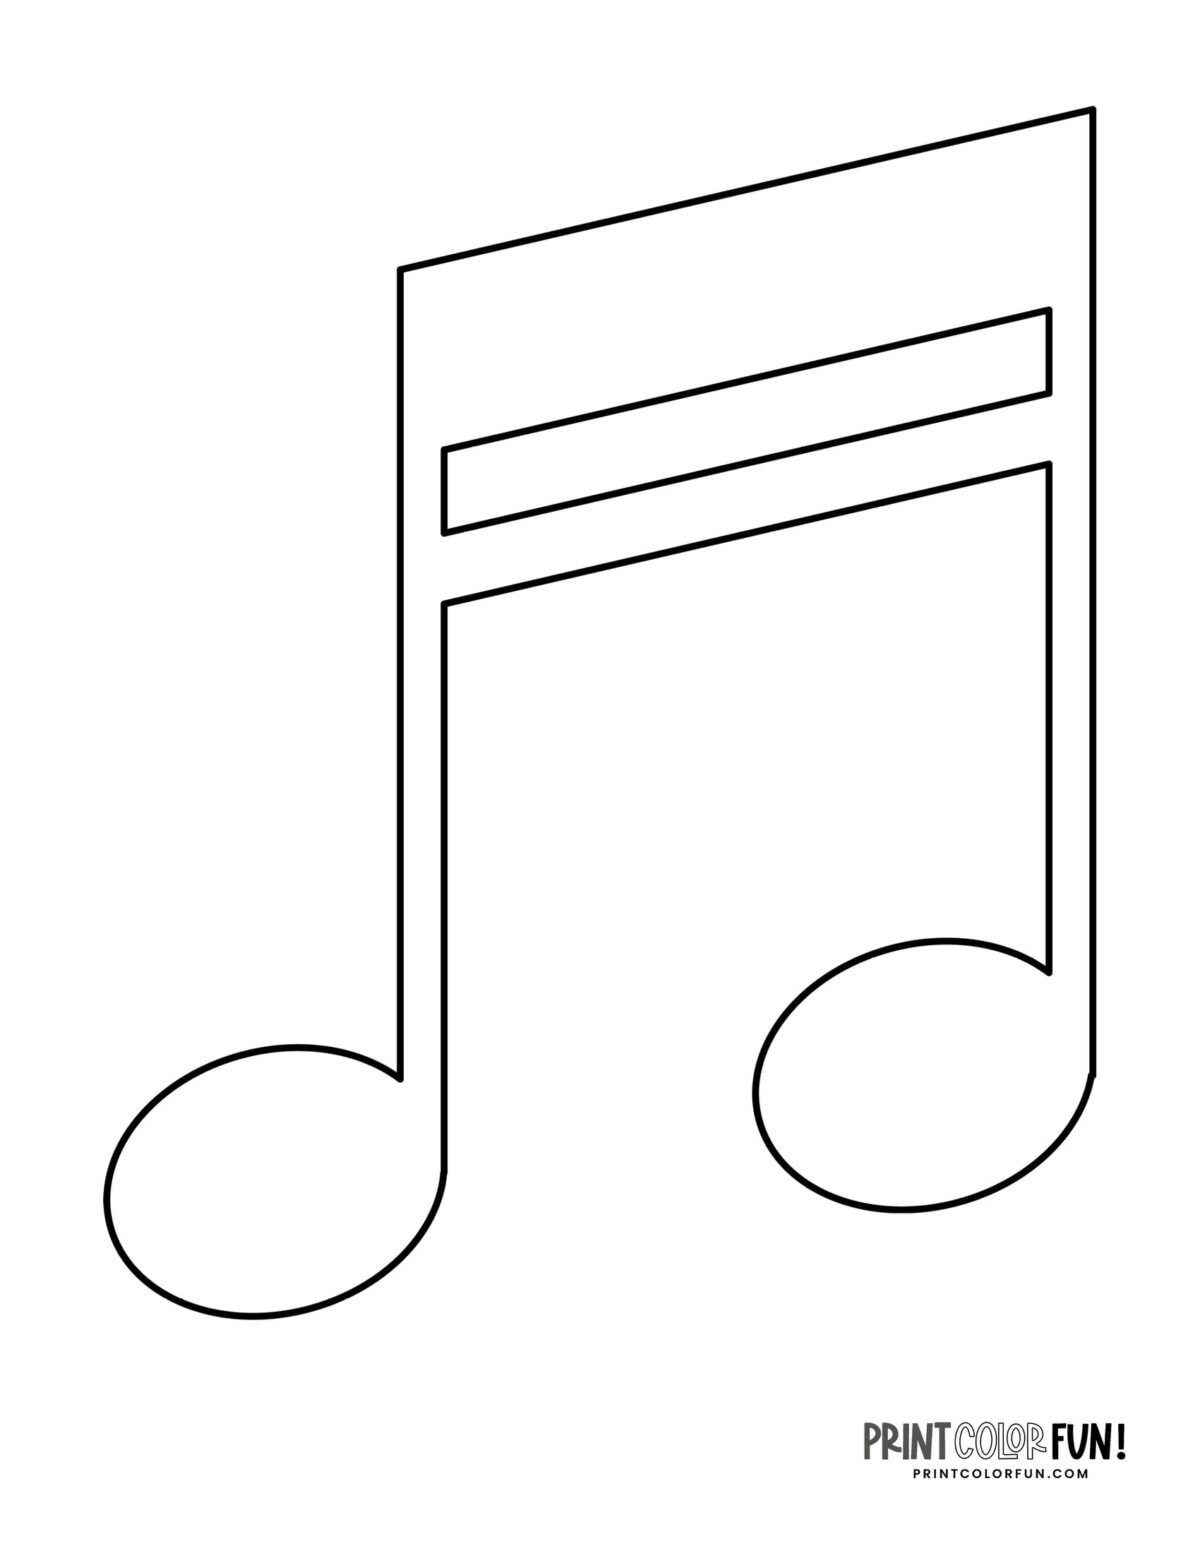 Musical note coloring pages & clipart, at PrintColorFun.com